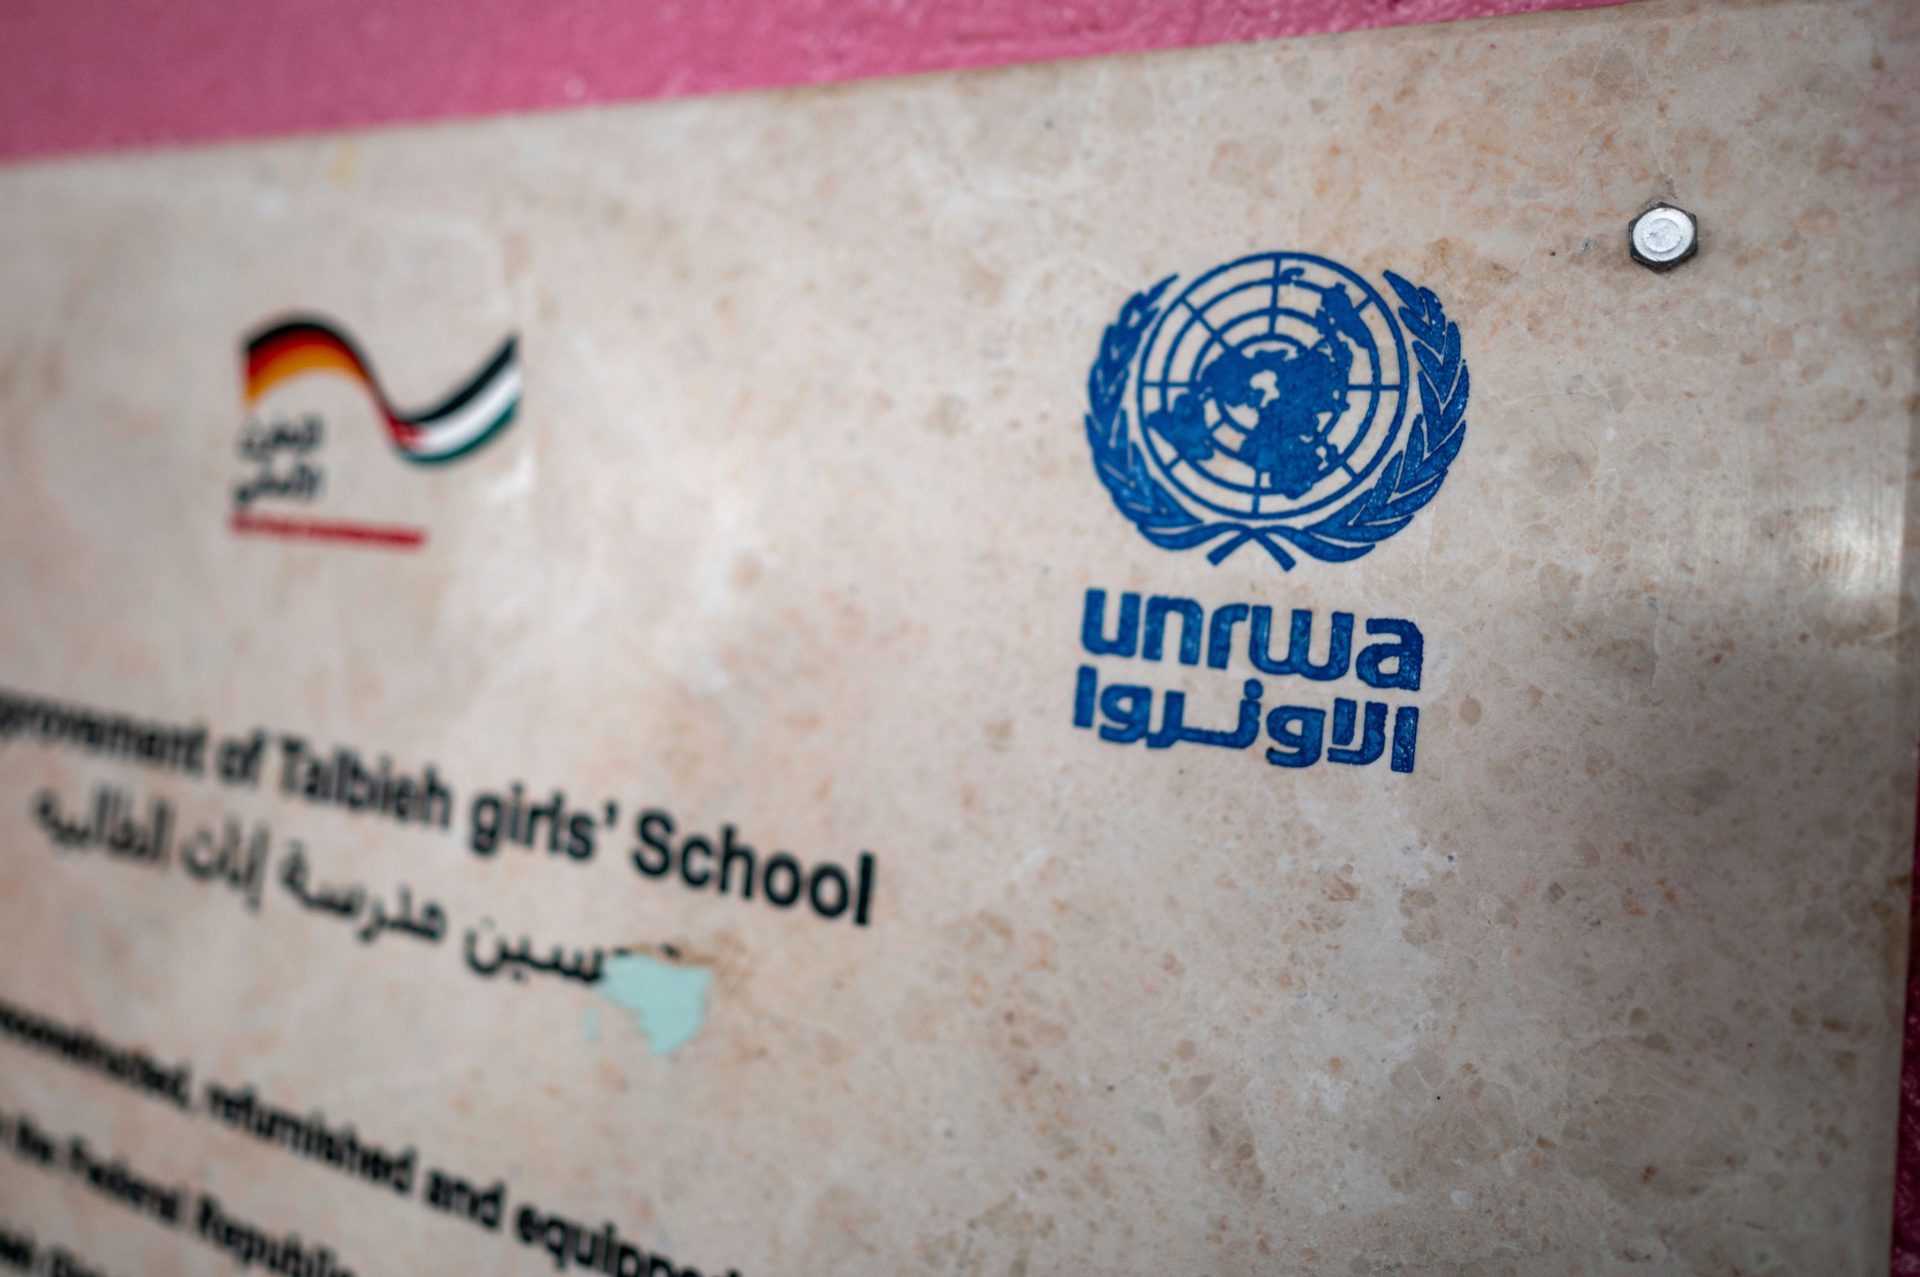 Tánaiste in Jordan: Pulling funding from UNRWA is ‘incomprehensible’